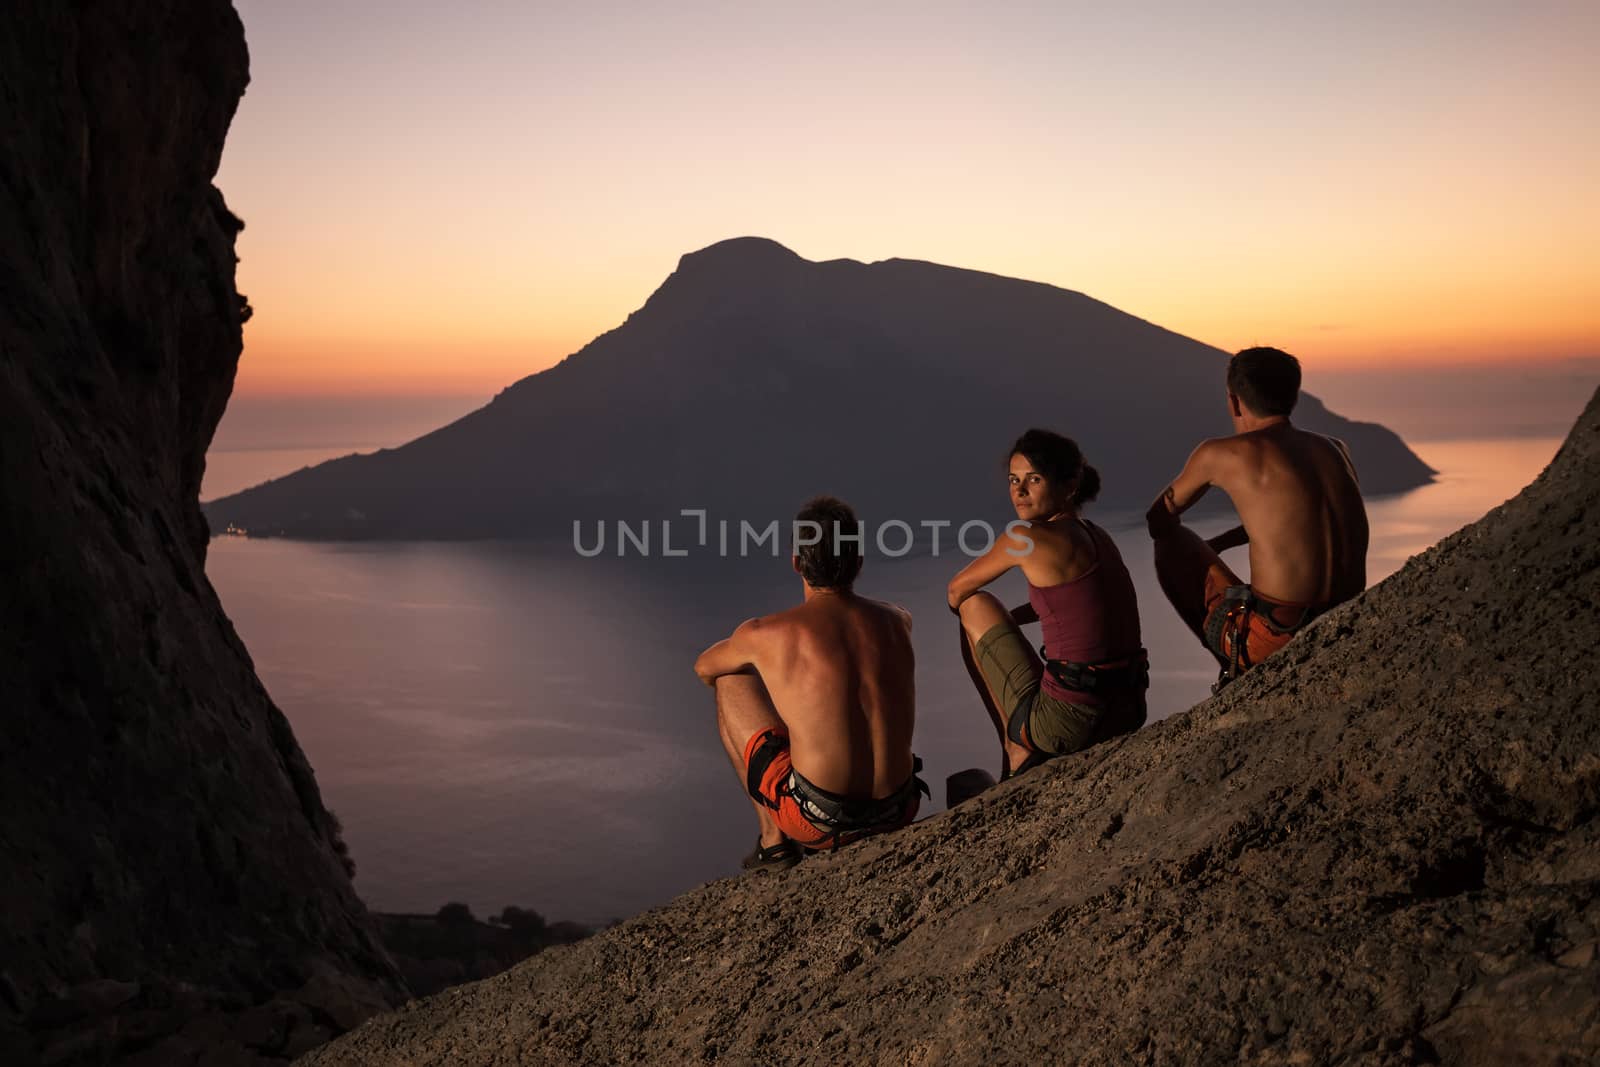 Rock climbers wearing safety harness at sunset by photobac